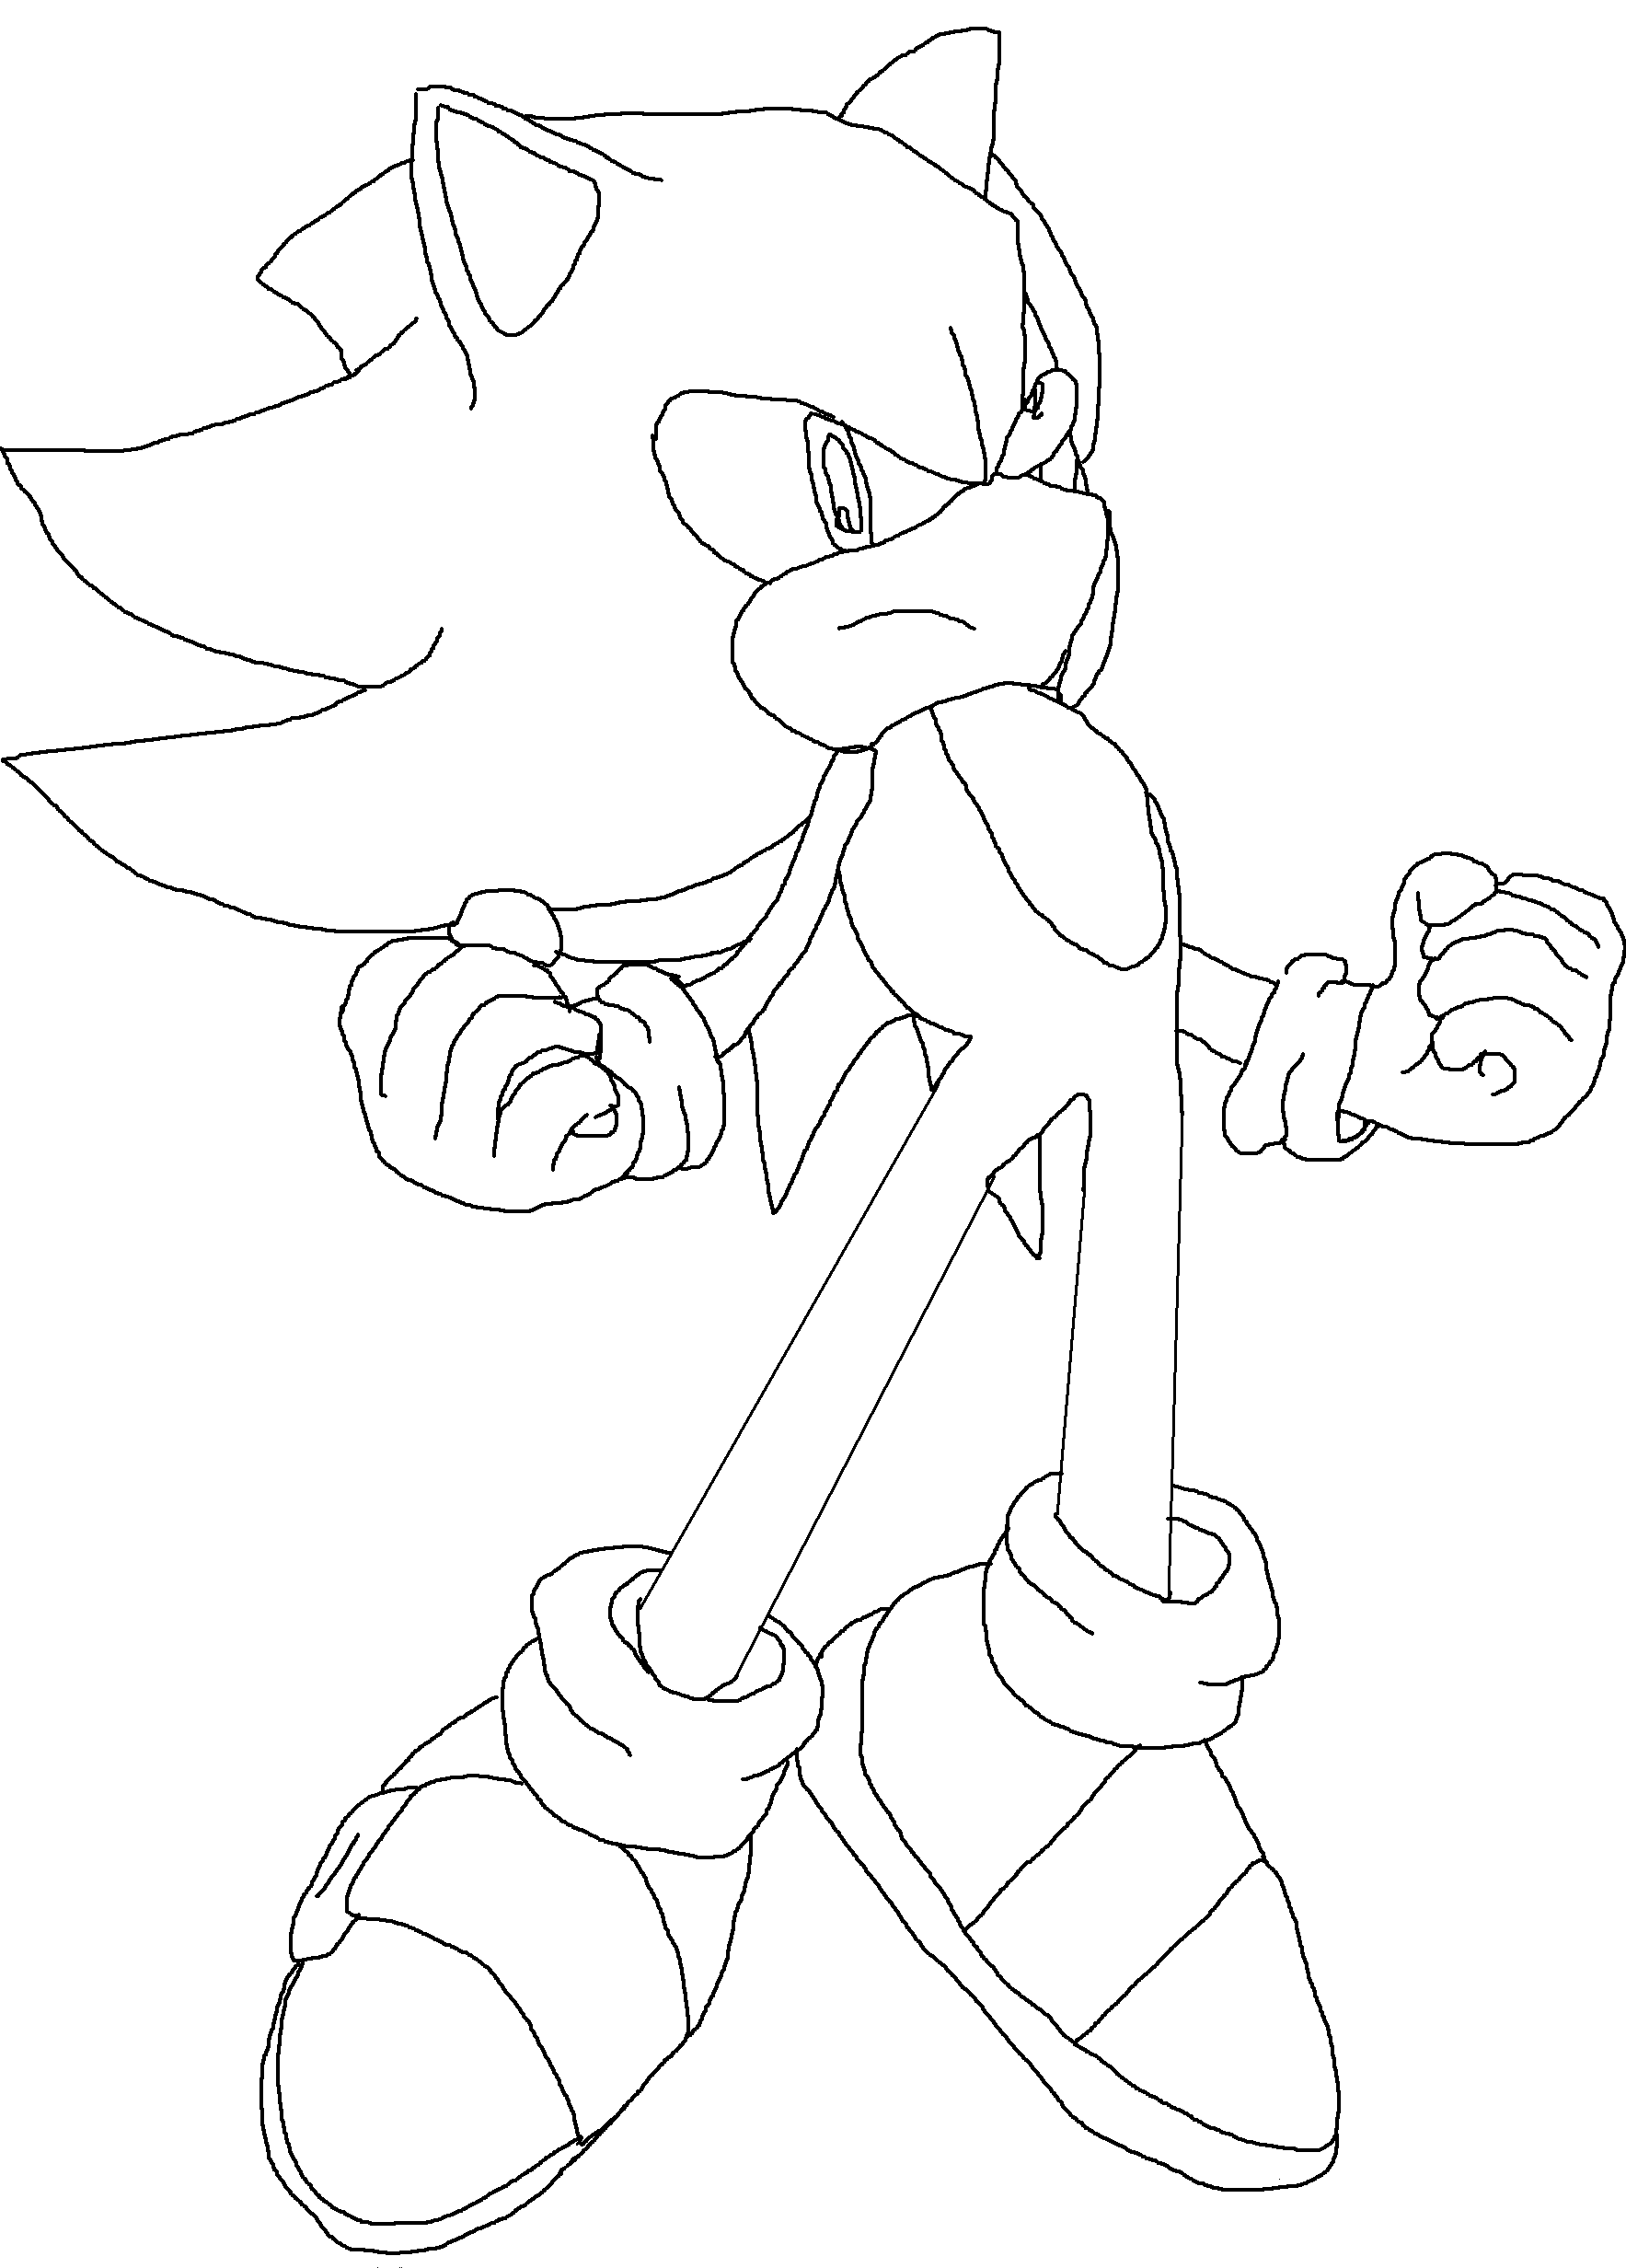 super sonic coloring page free printable sonic the hedgehog coloring pages for kids super sonic coloring page 